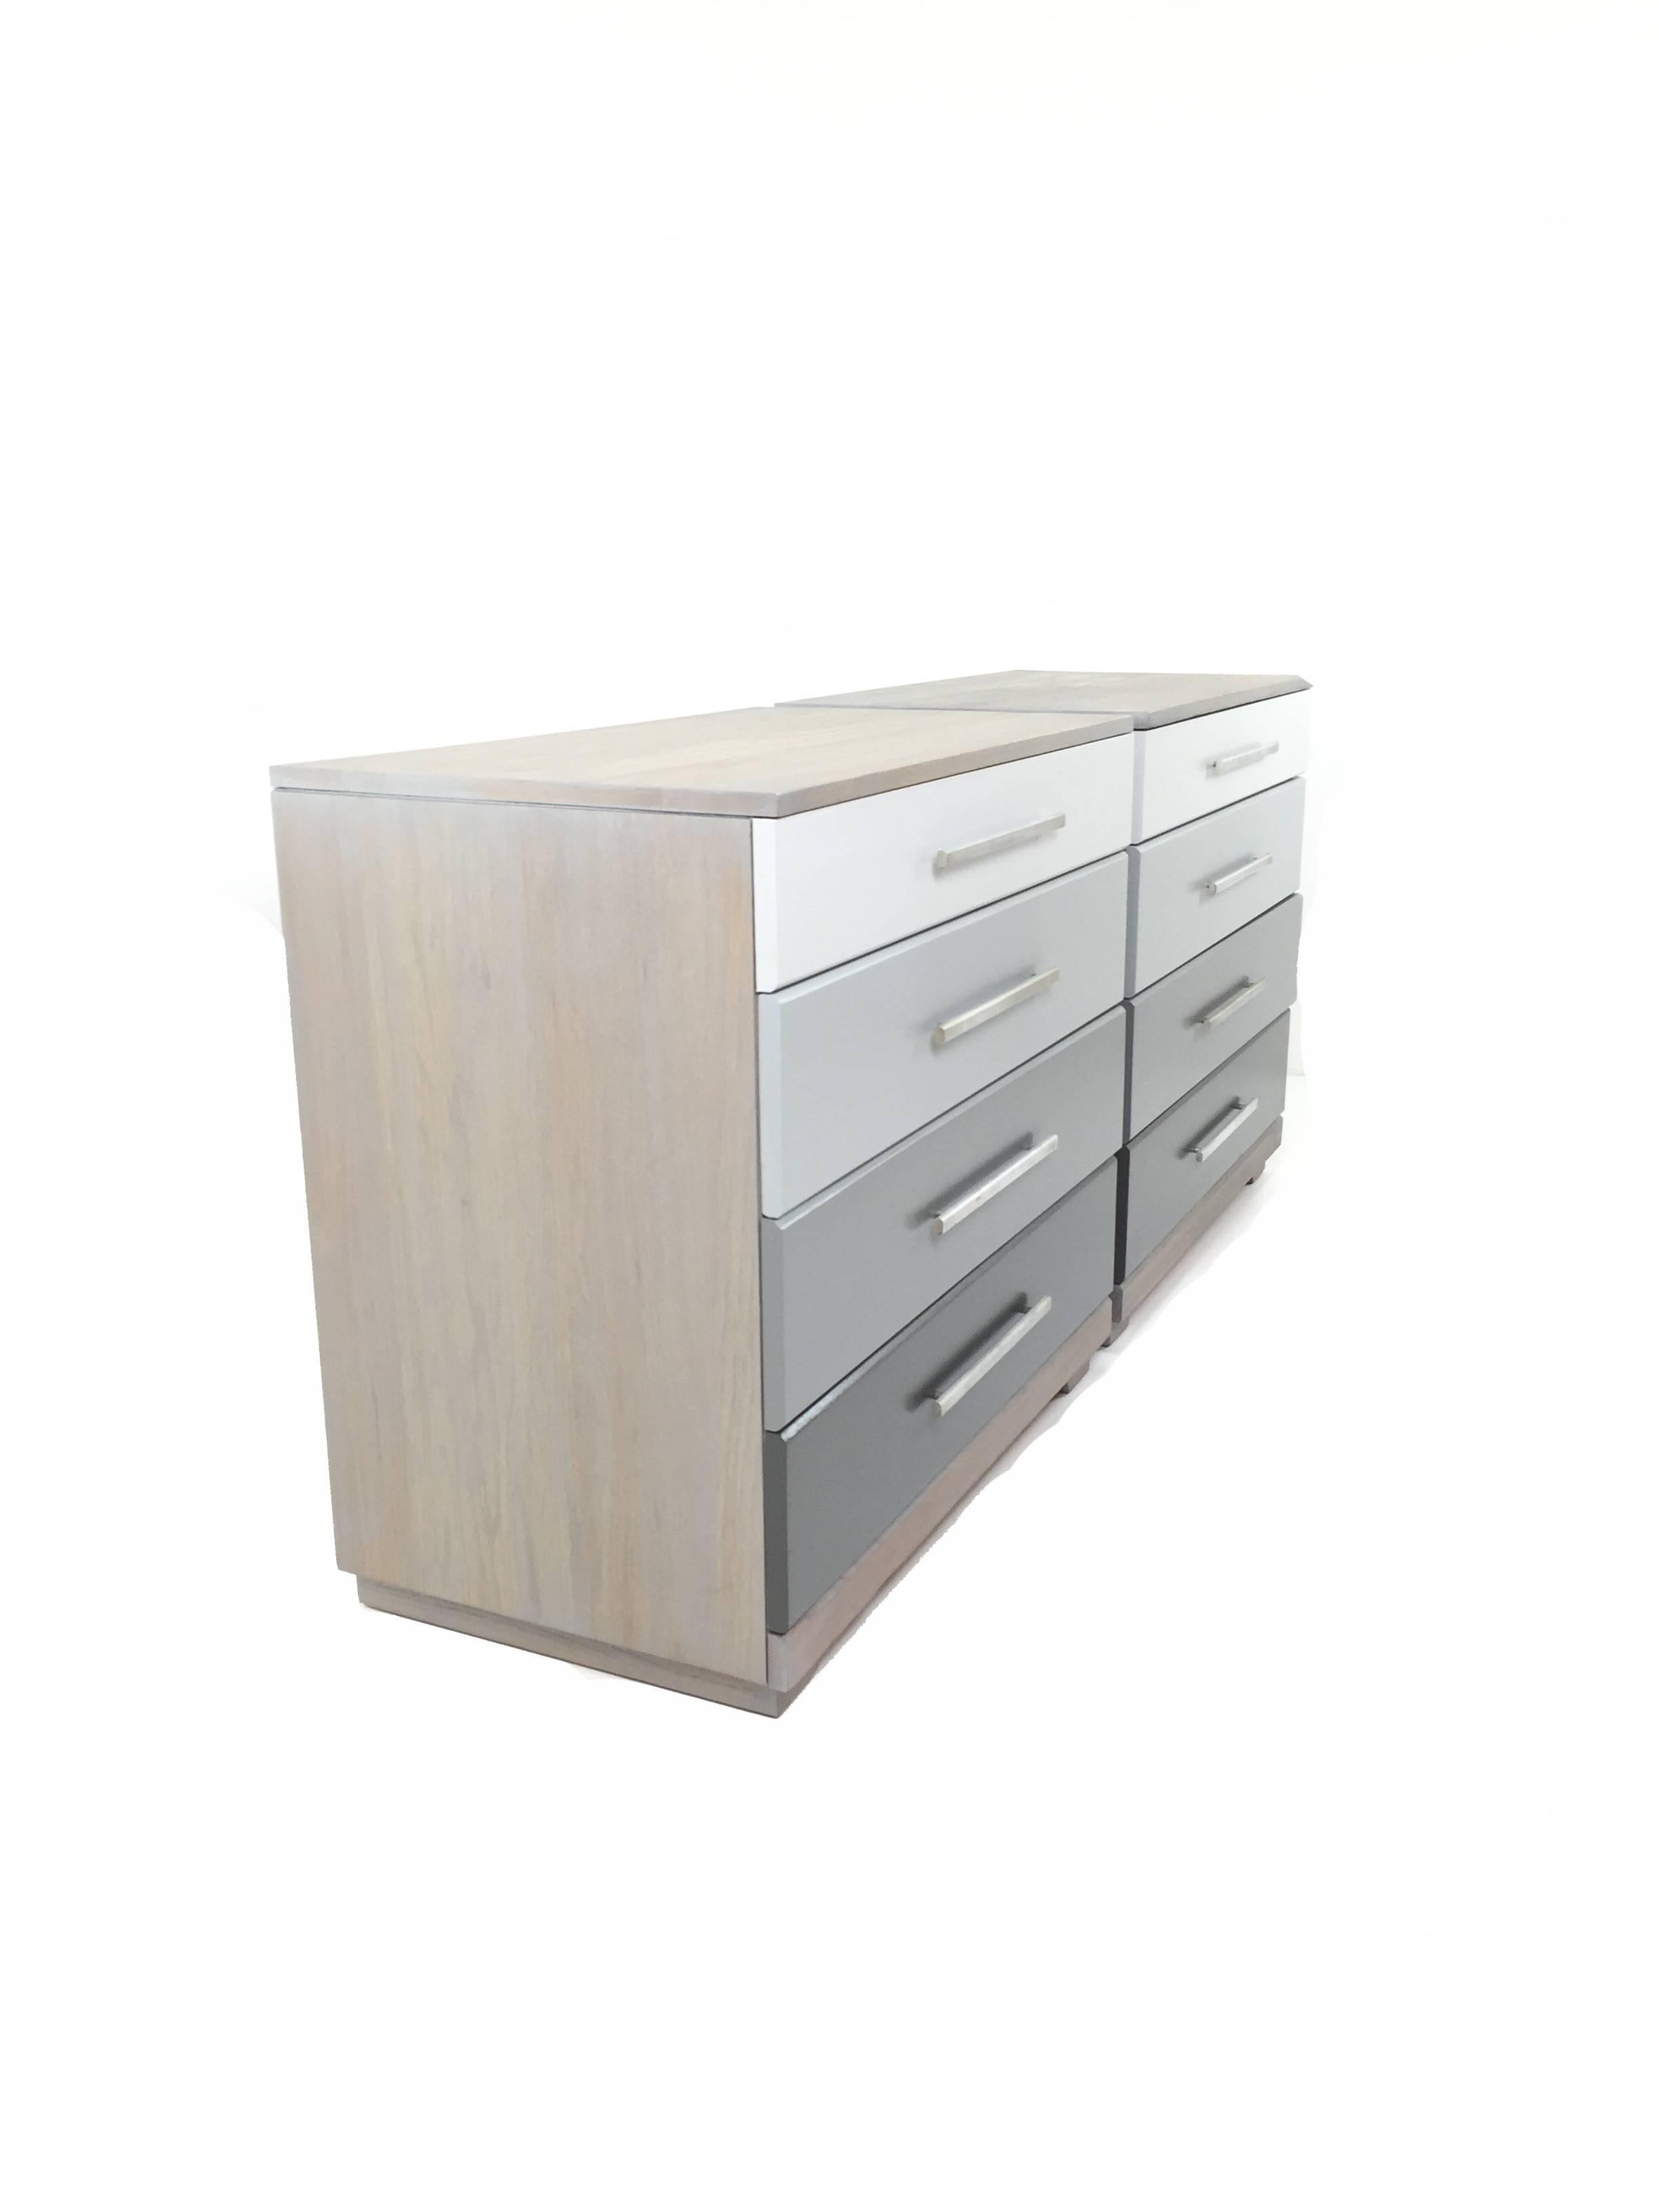 Grey wash stain scase, ombre drawer chests by Raymond Loewy for Mengle Furniture Company.